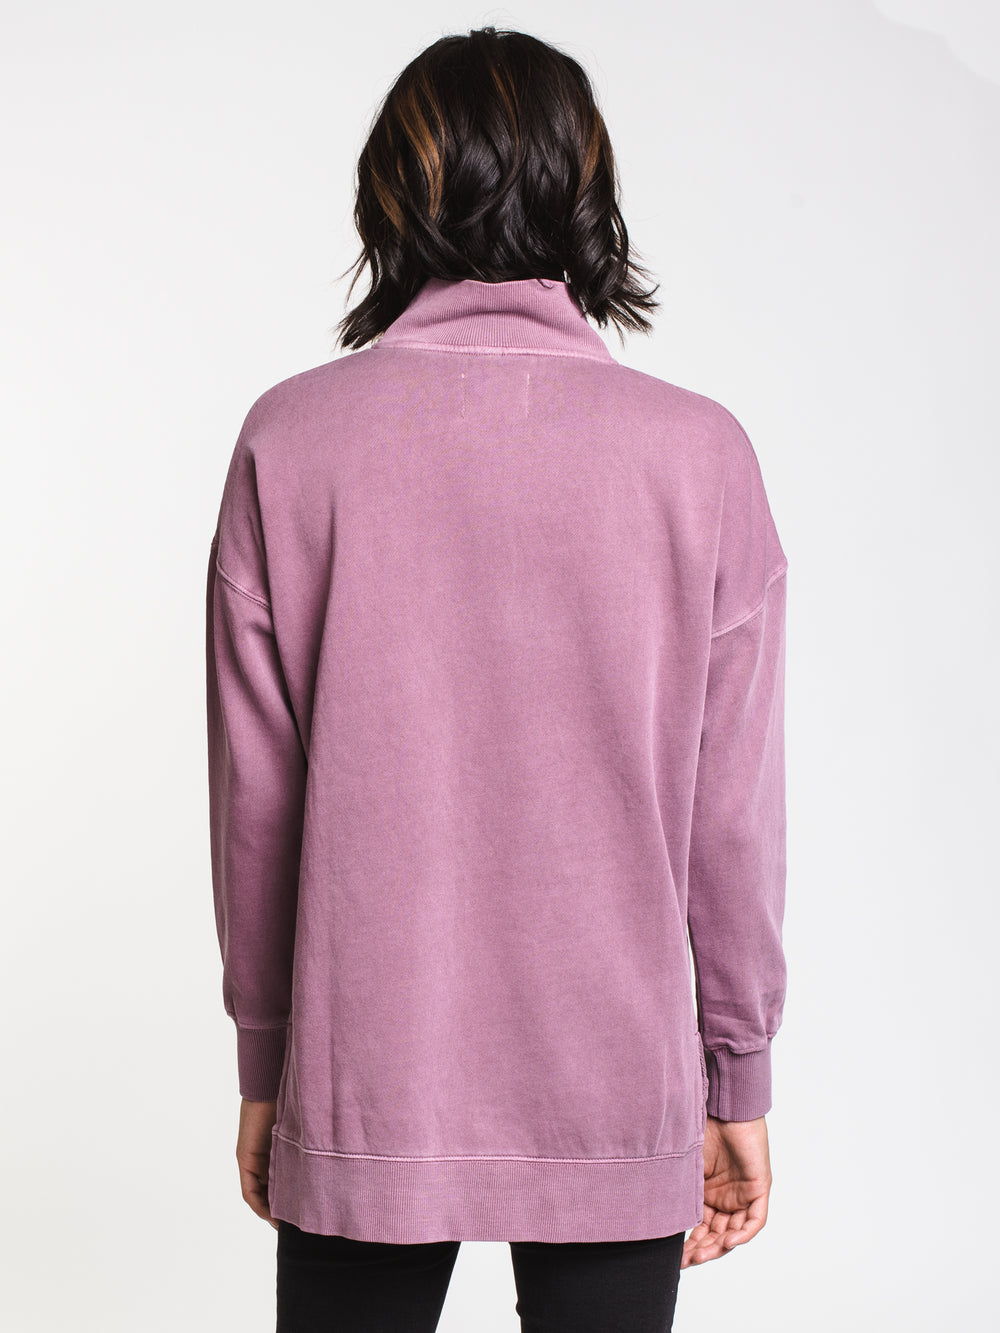 WOMENS BRYNLEE QUARTER ZIP - CLEARANCE